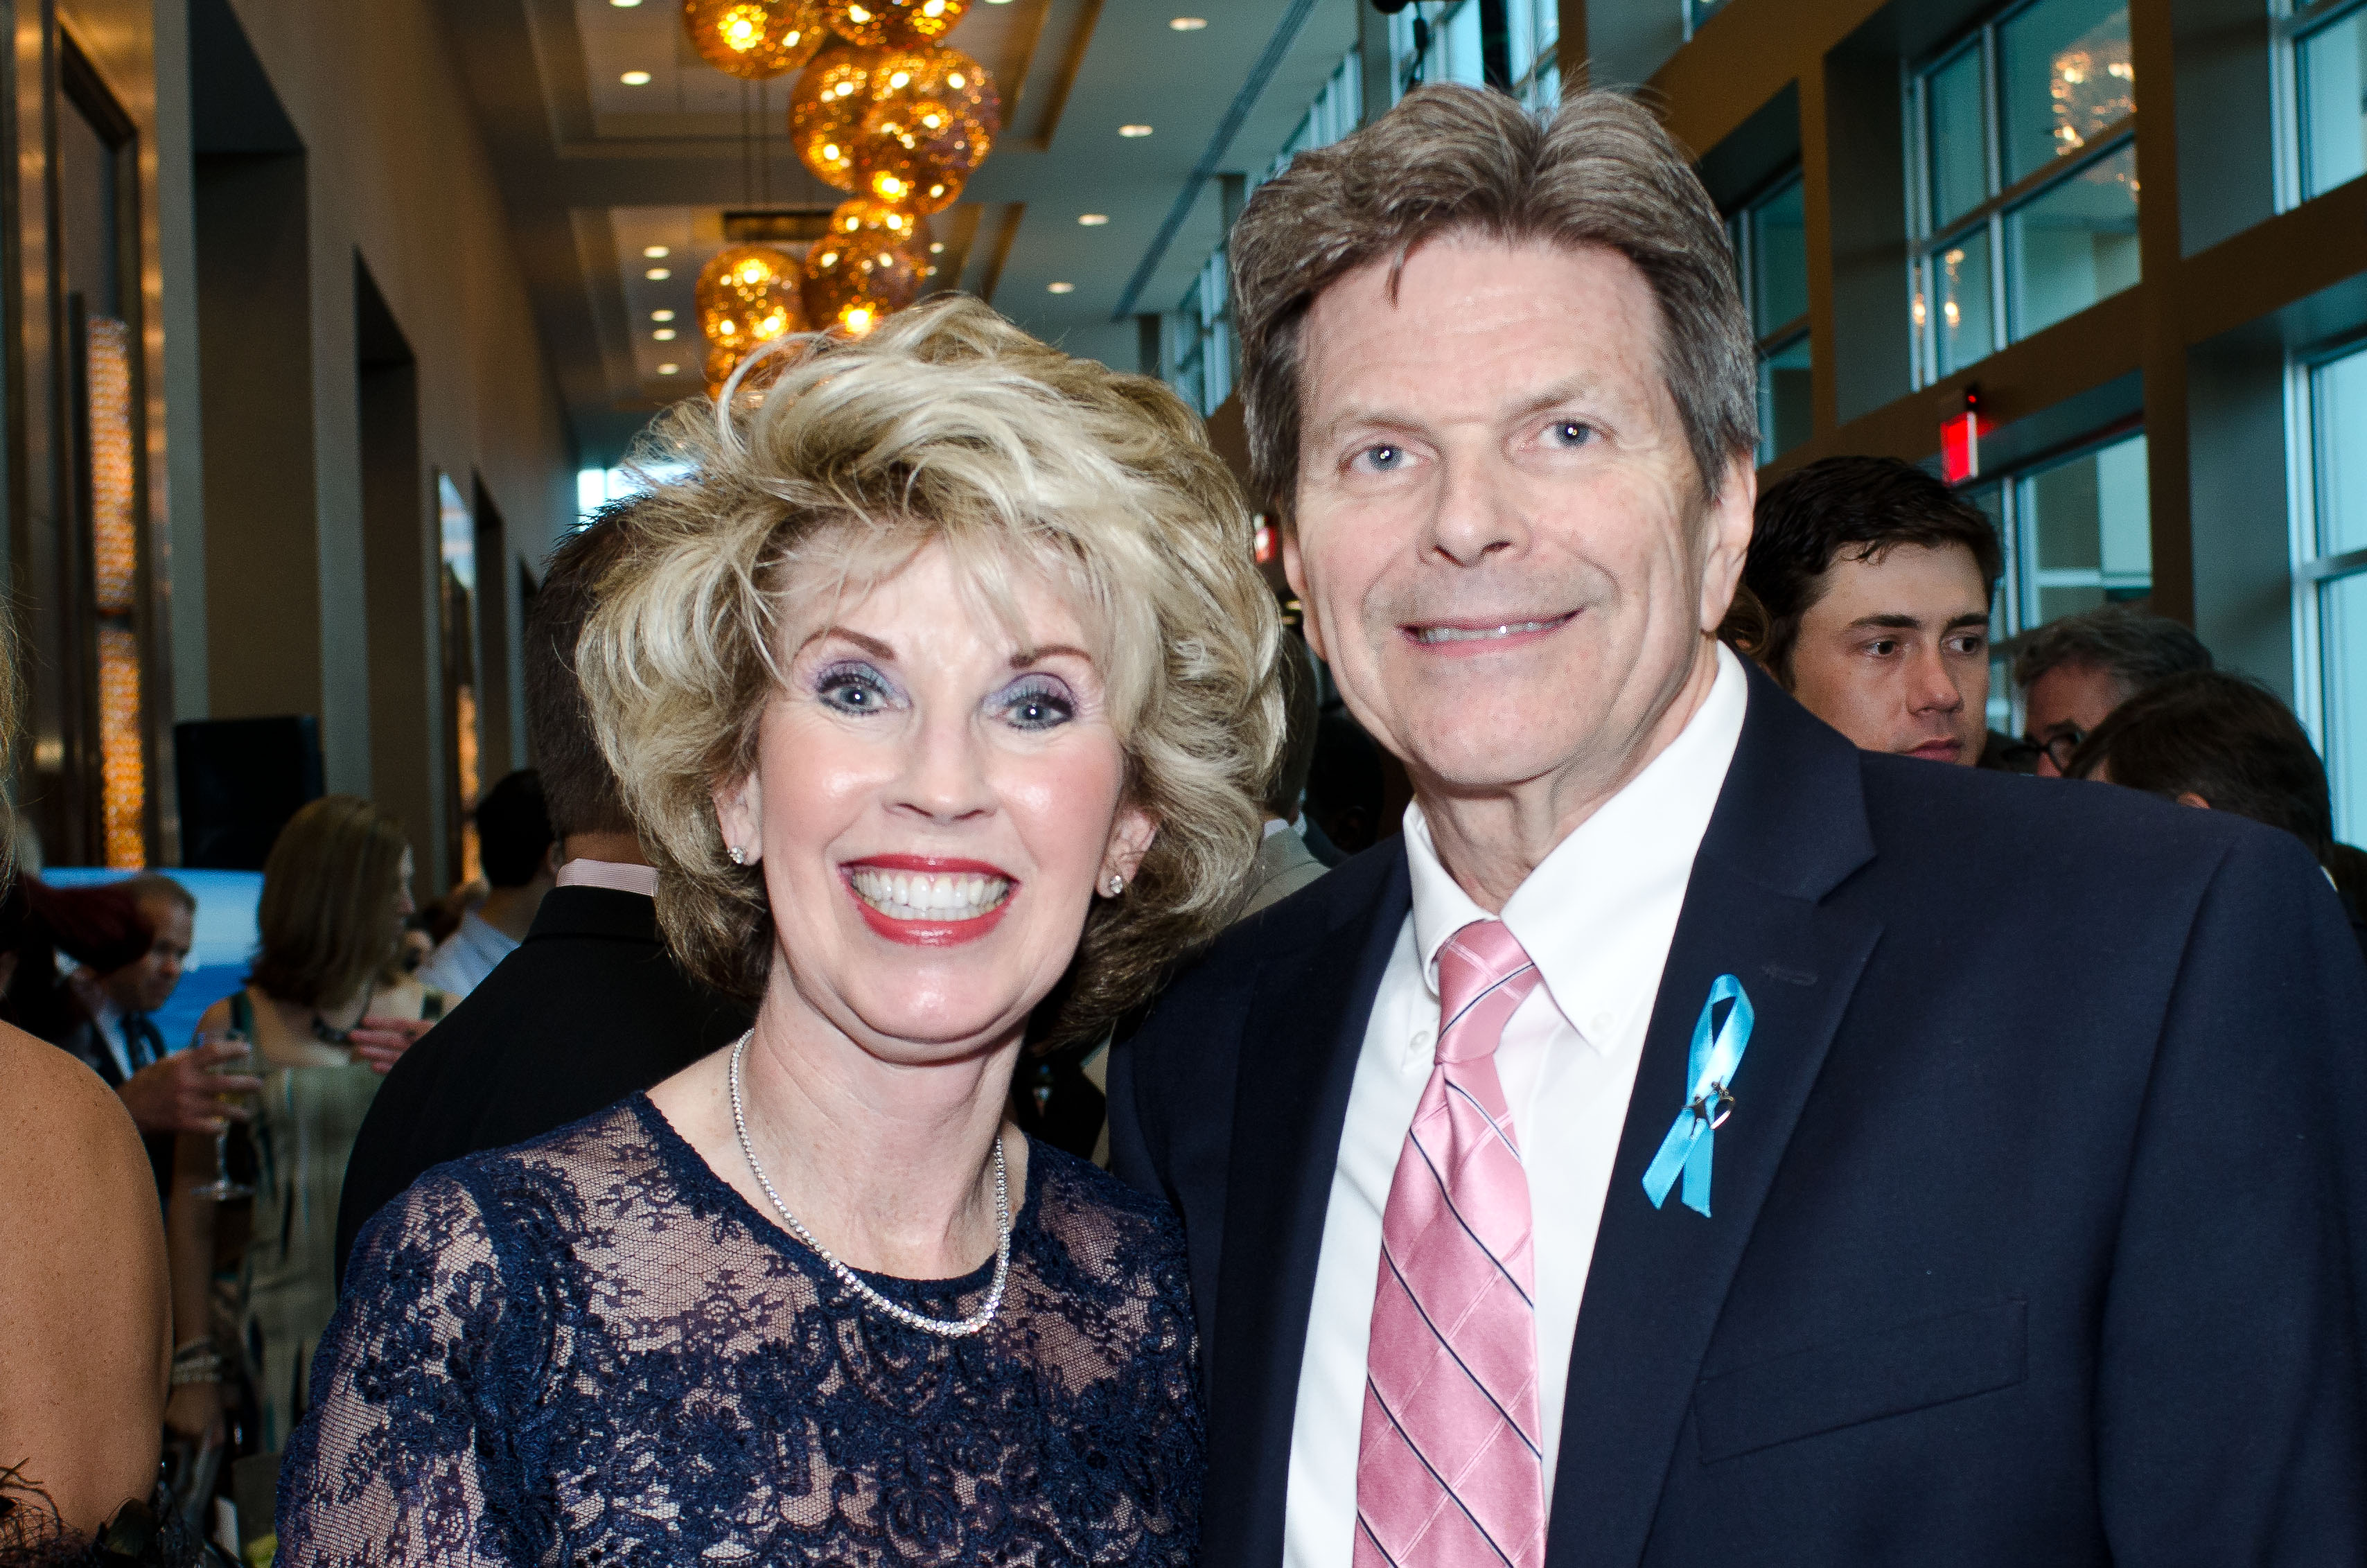 Connie and Bill Nelson - "Big Couple" and Event Committee Chairs for Ice Ball 2014.